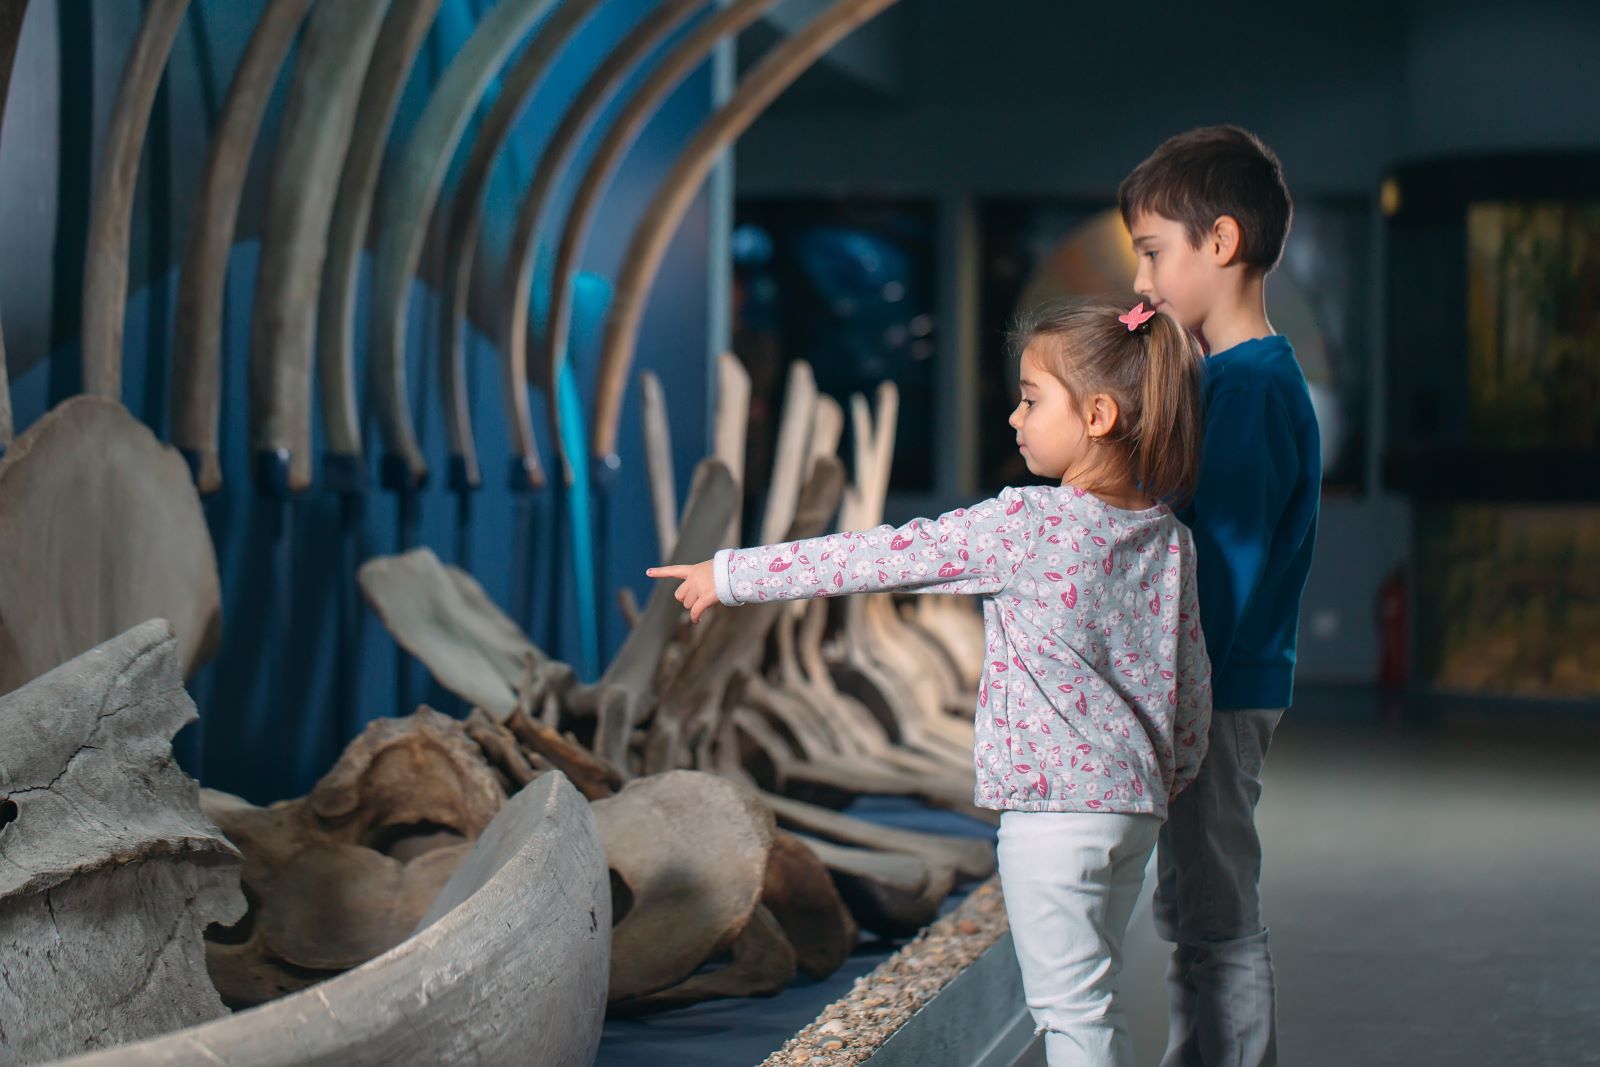 brother and sister looking at large animal skeleton in a museum